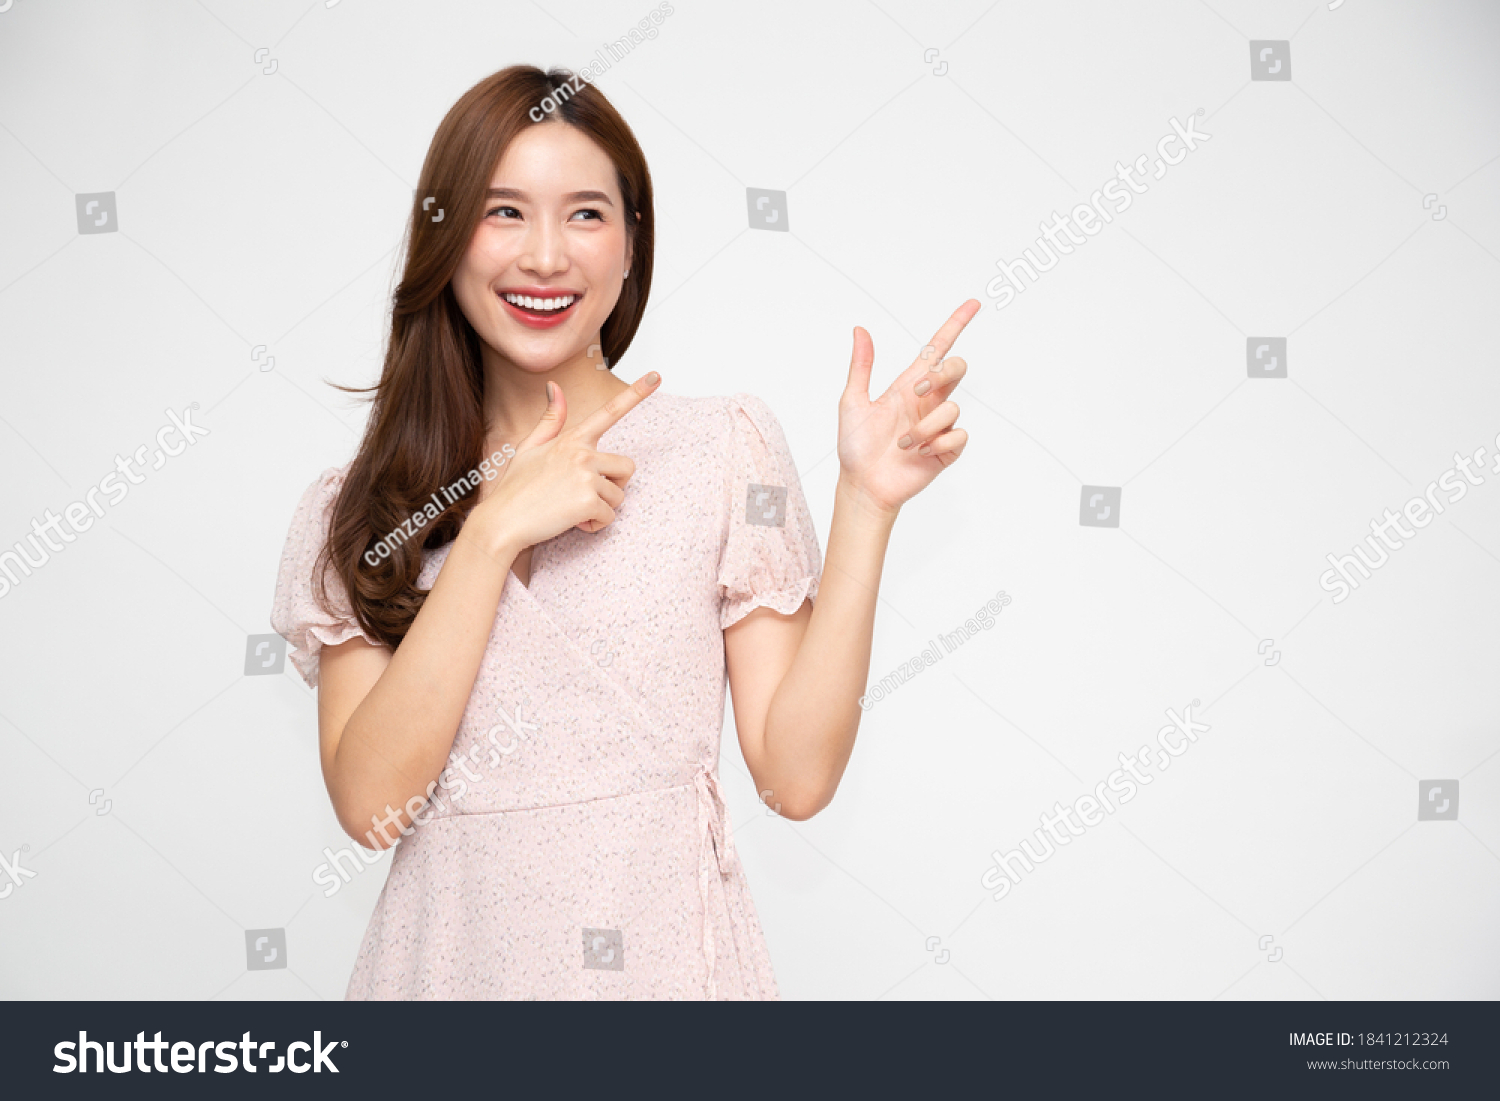 Young elegant beautiful Asian woman smiling and pointing to empty copy space isolated on white background #1841212324